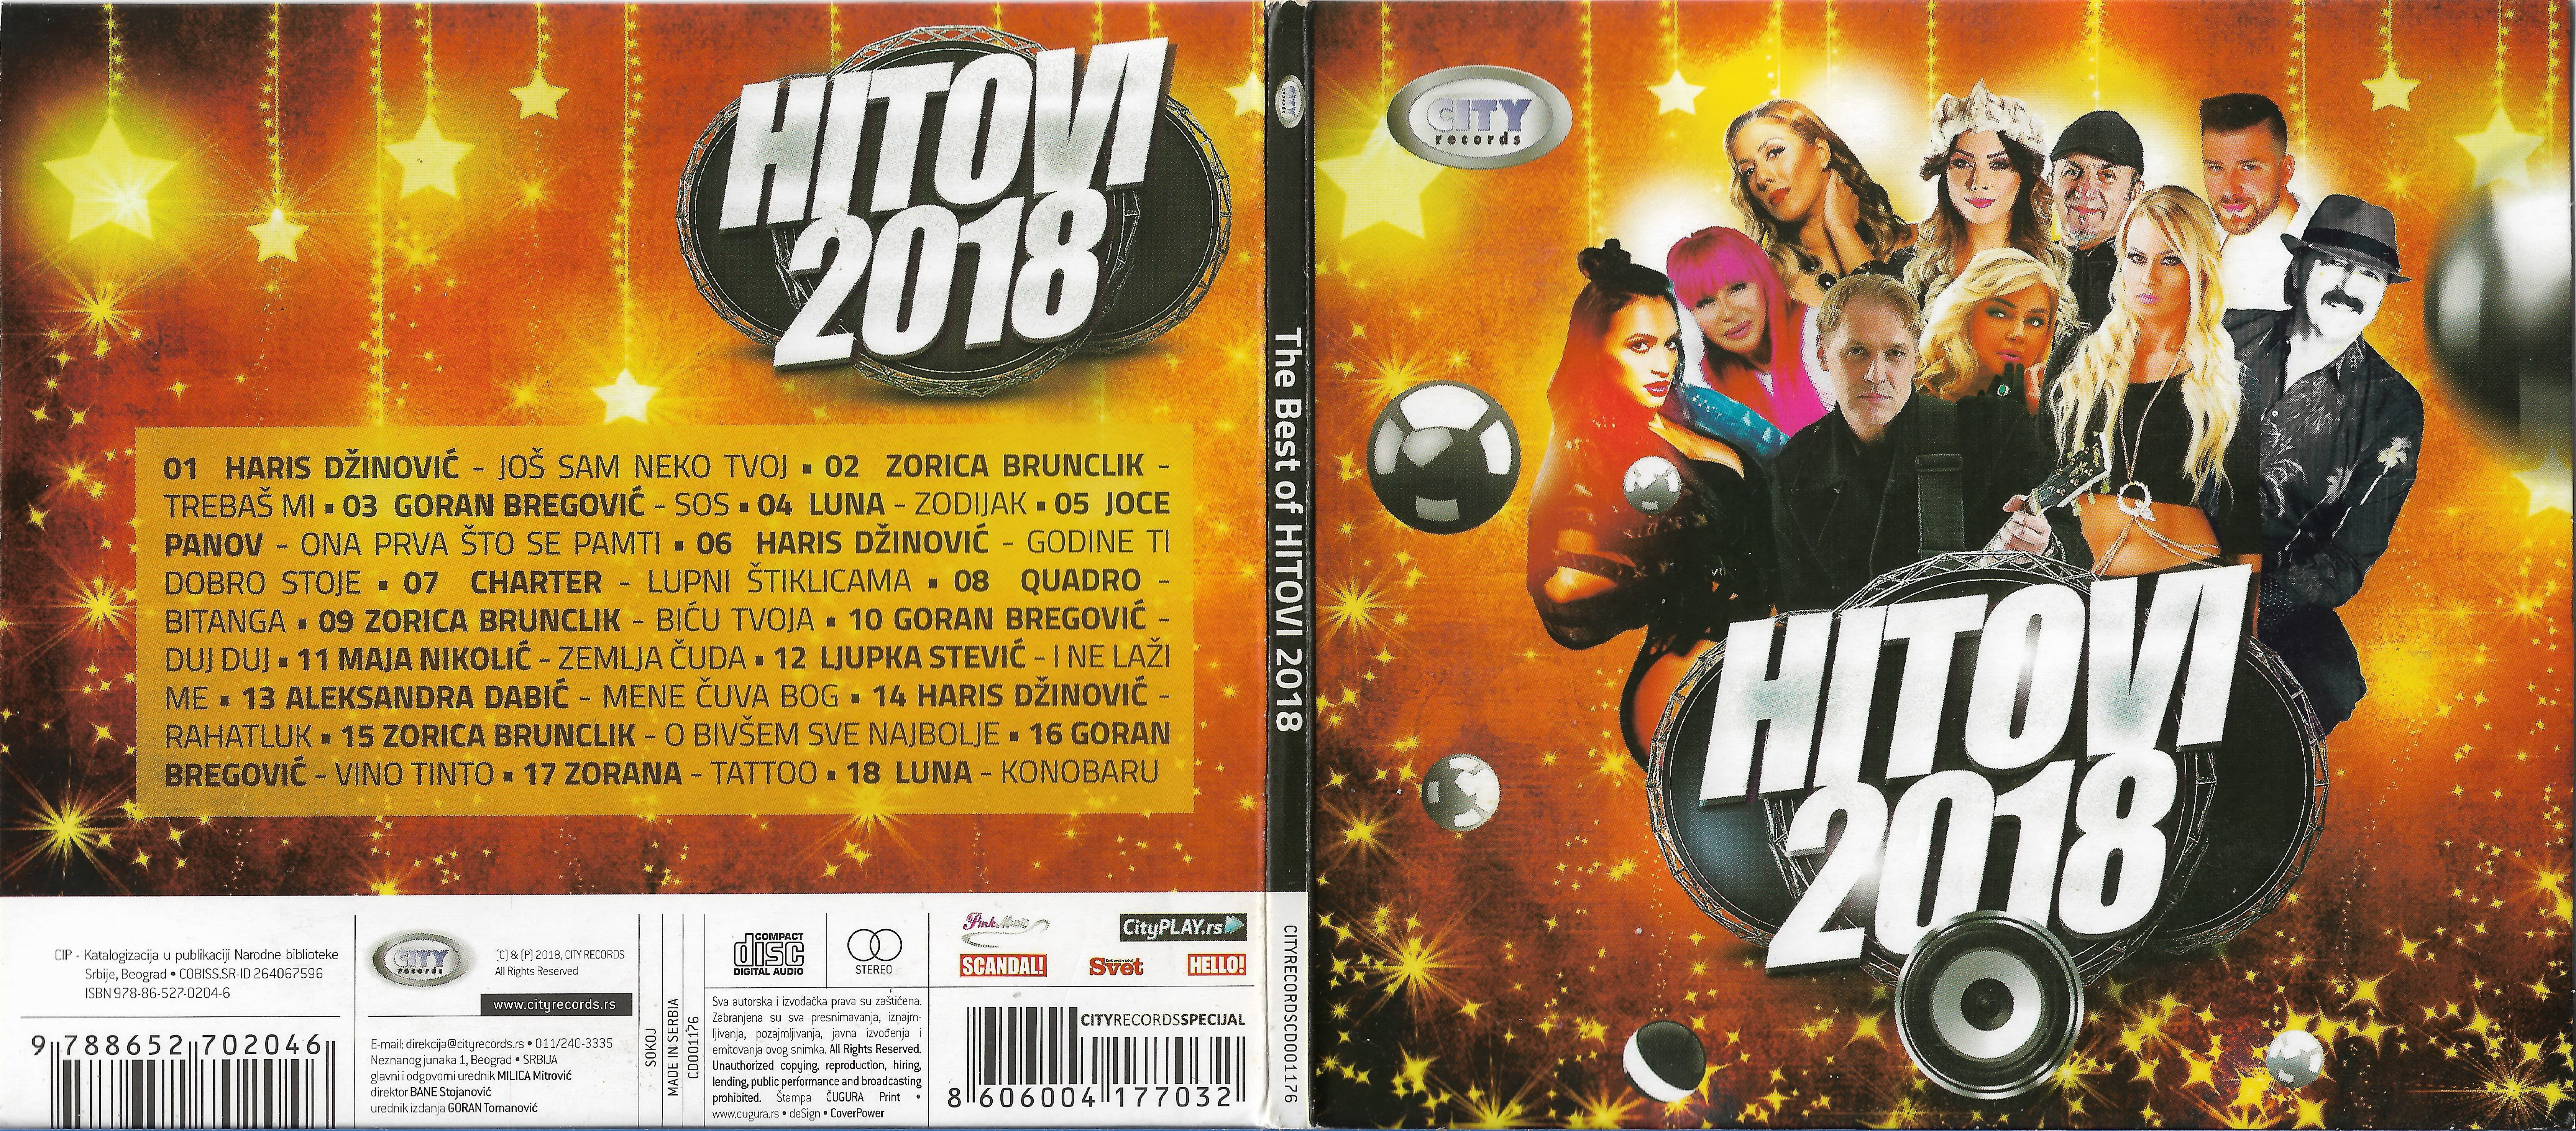 The Best Of Hitovi 2018 1